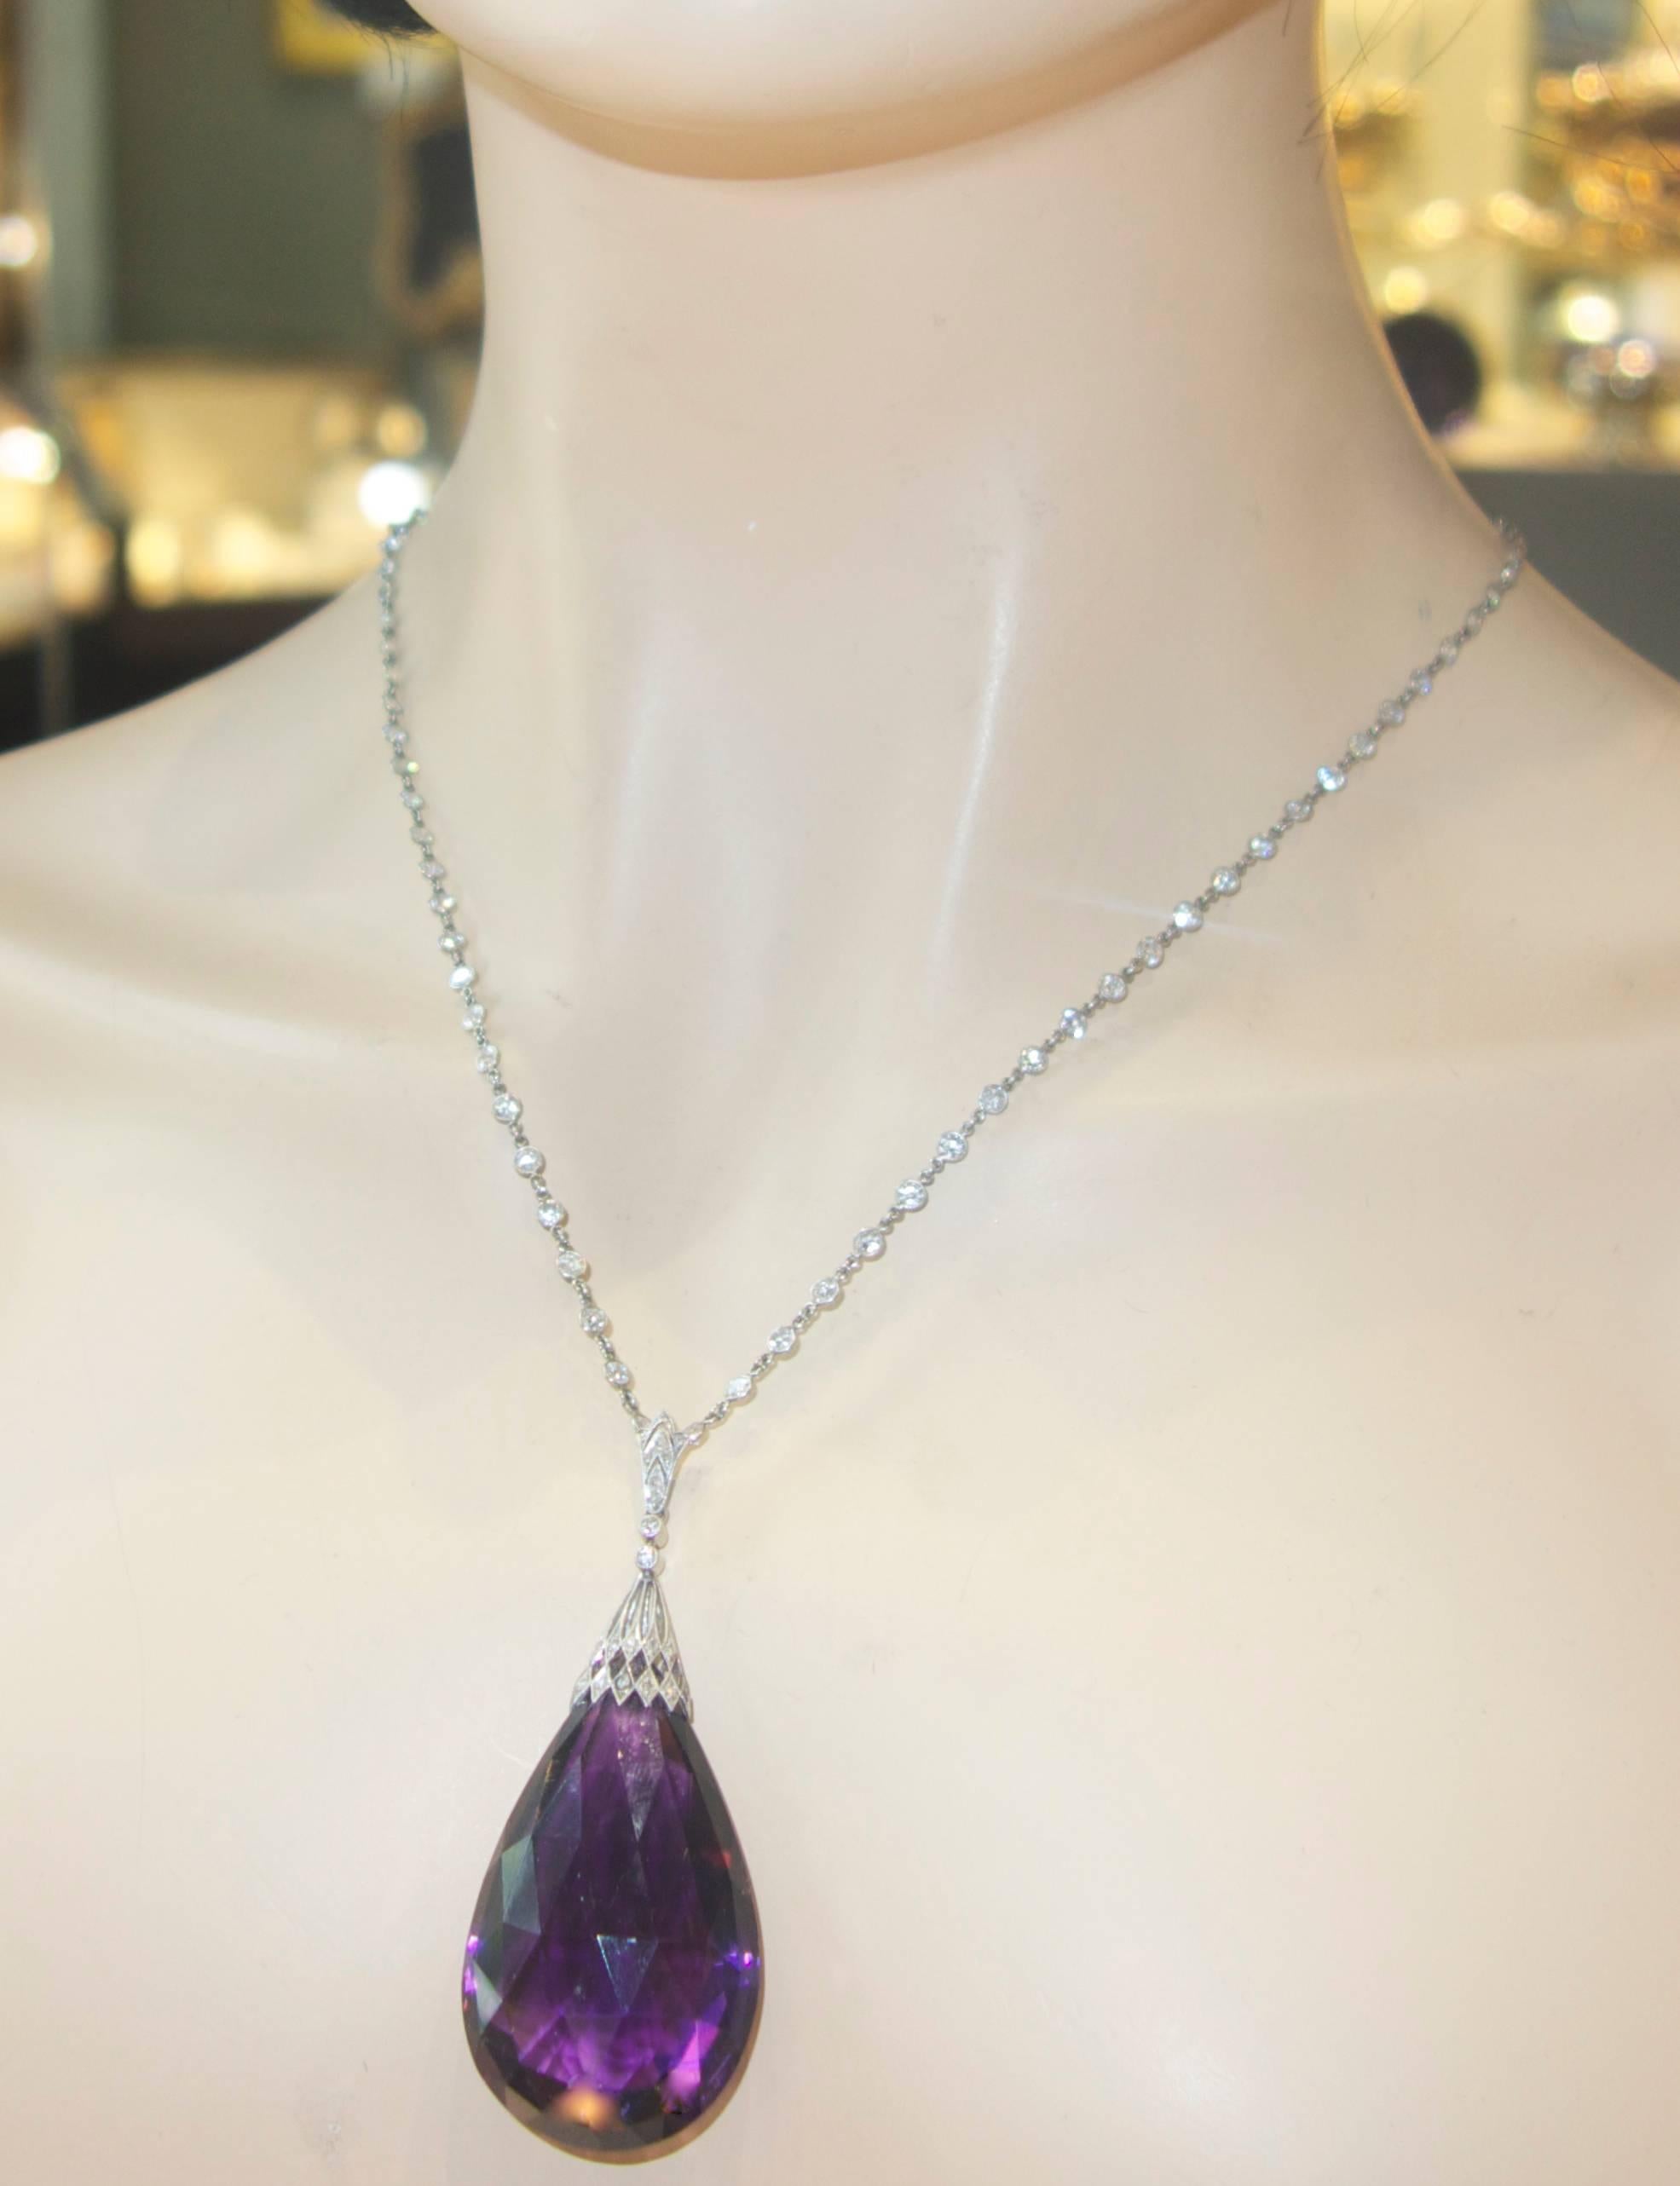 Platinum and rose cut diamond pendant suspending a fine deep purple facetted briolette amethyst weighing 114 cts., this pendant is Edwardian, circa 1910.  The 16.5 inch platinum and diamond chain is contemporary and has approximately 5 cts.  